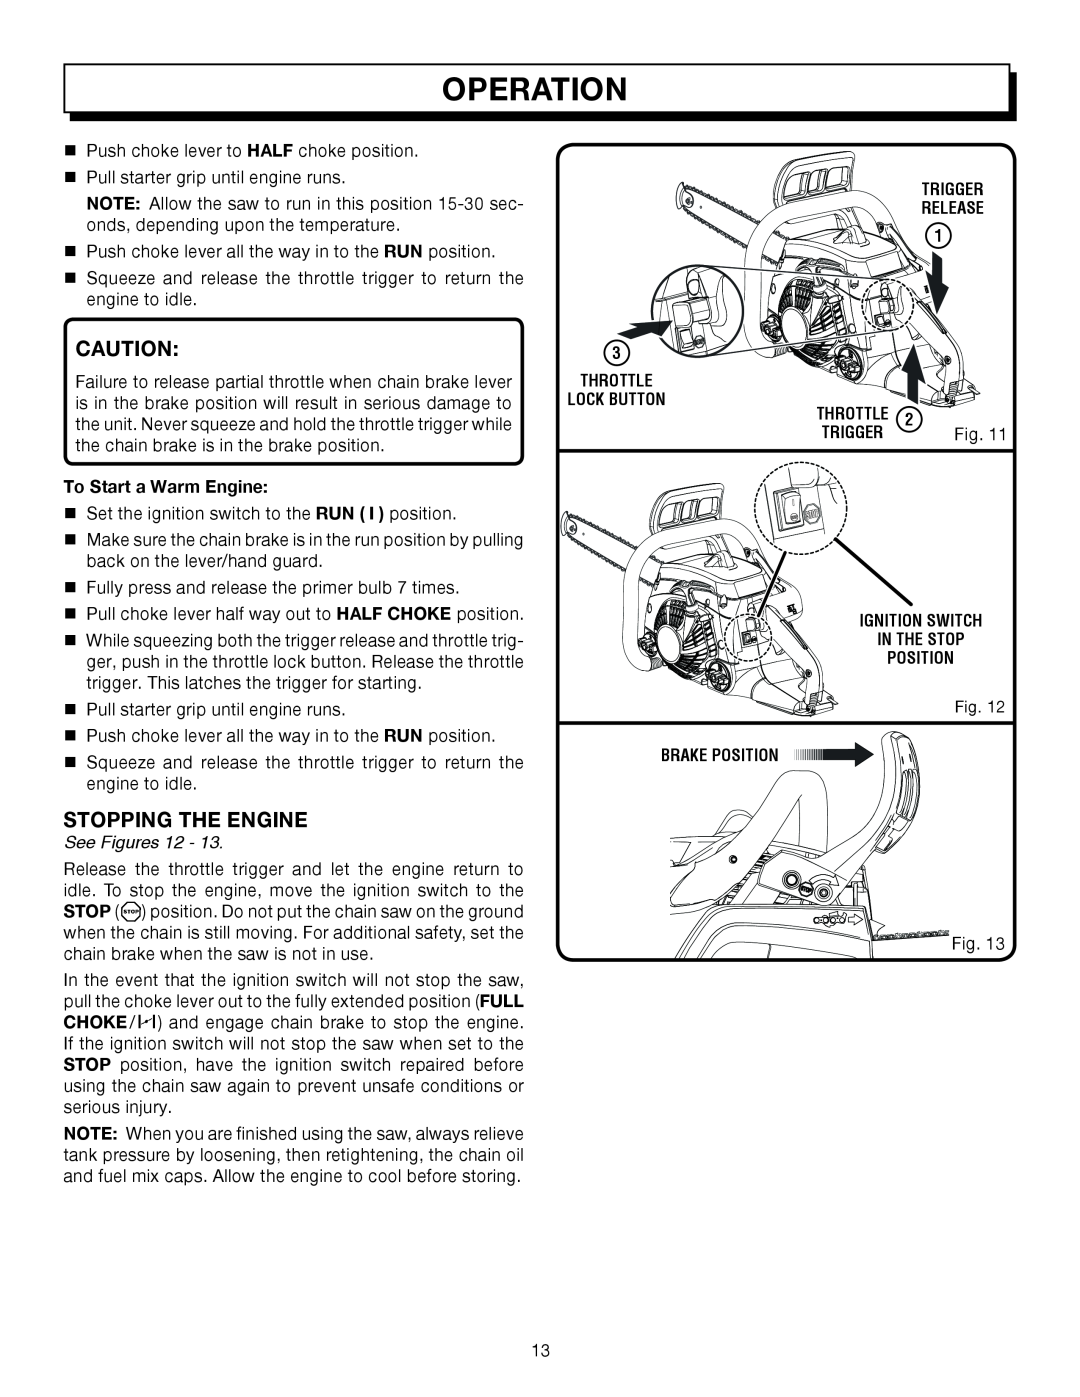 Homelite UT10512 Operation, To Start a Warm Engine, See Figures 12, Ignition Switch In The Stop Position, Brake Position 